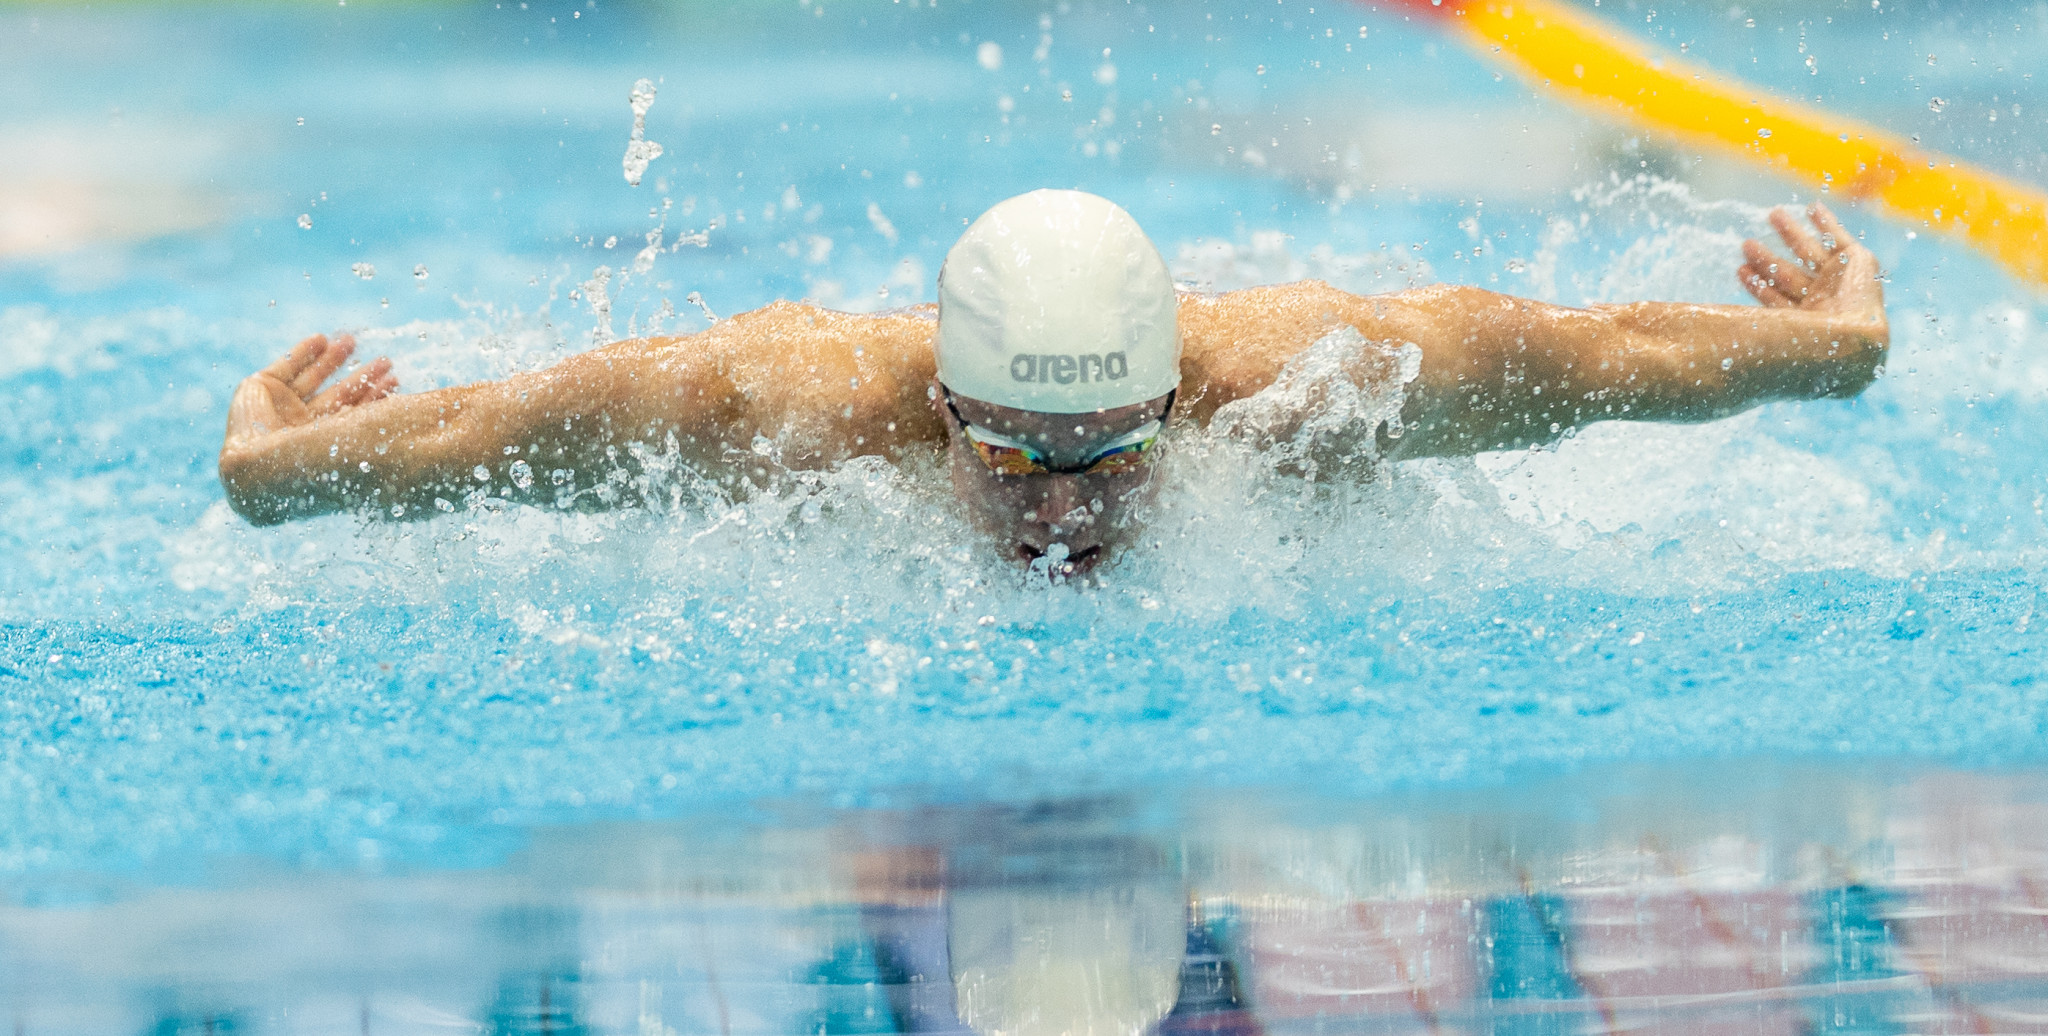 South African teenager States continues to impress at FINA Swimming World Cup